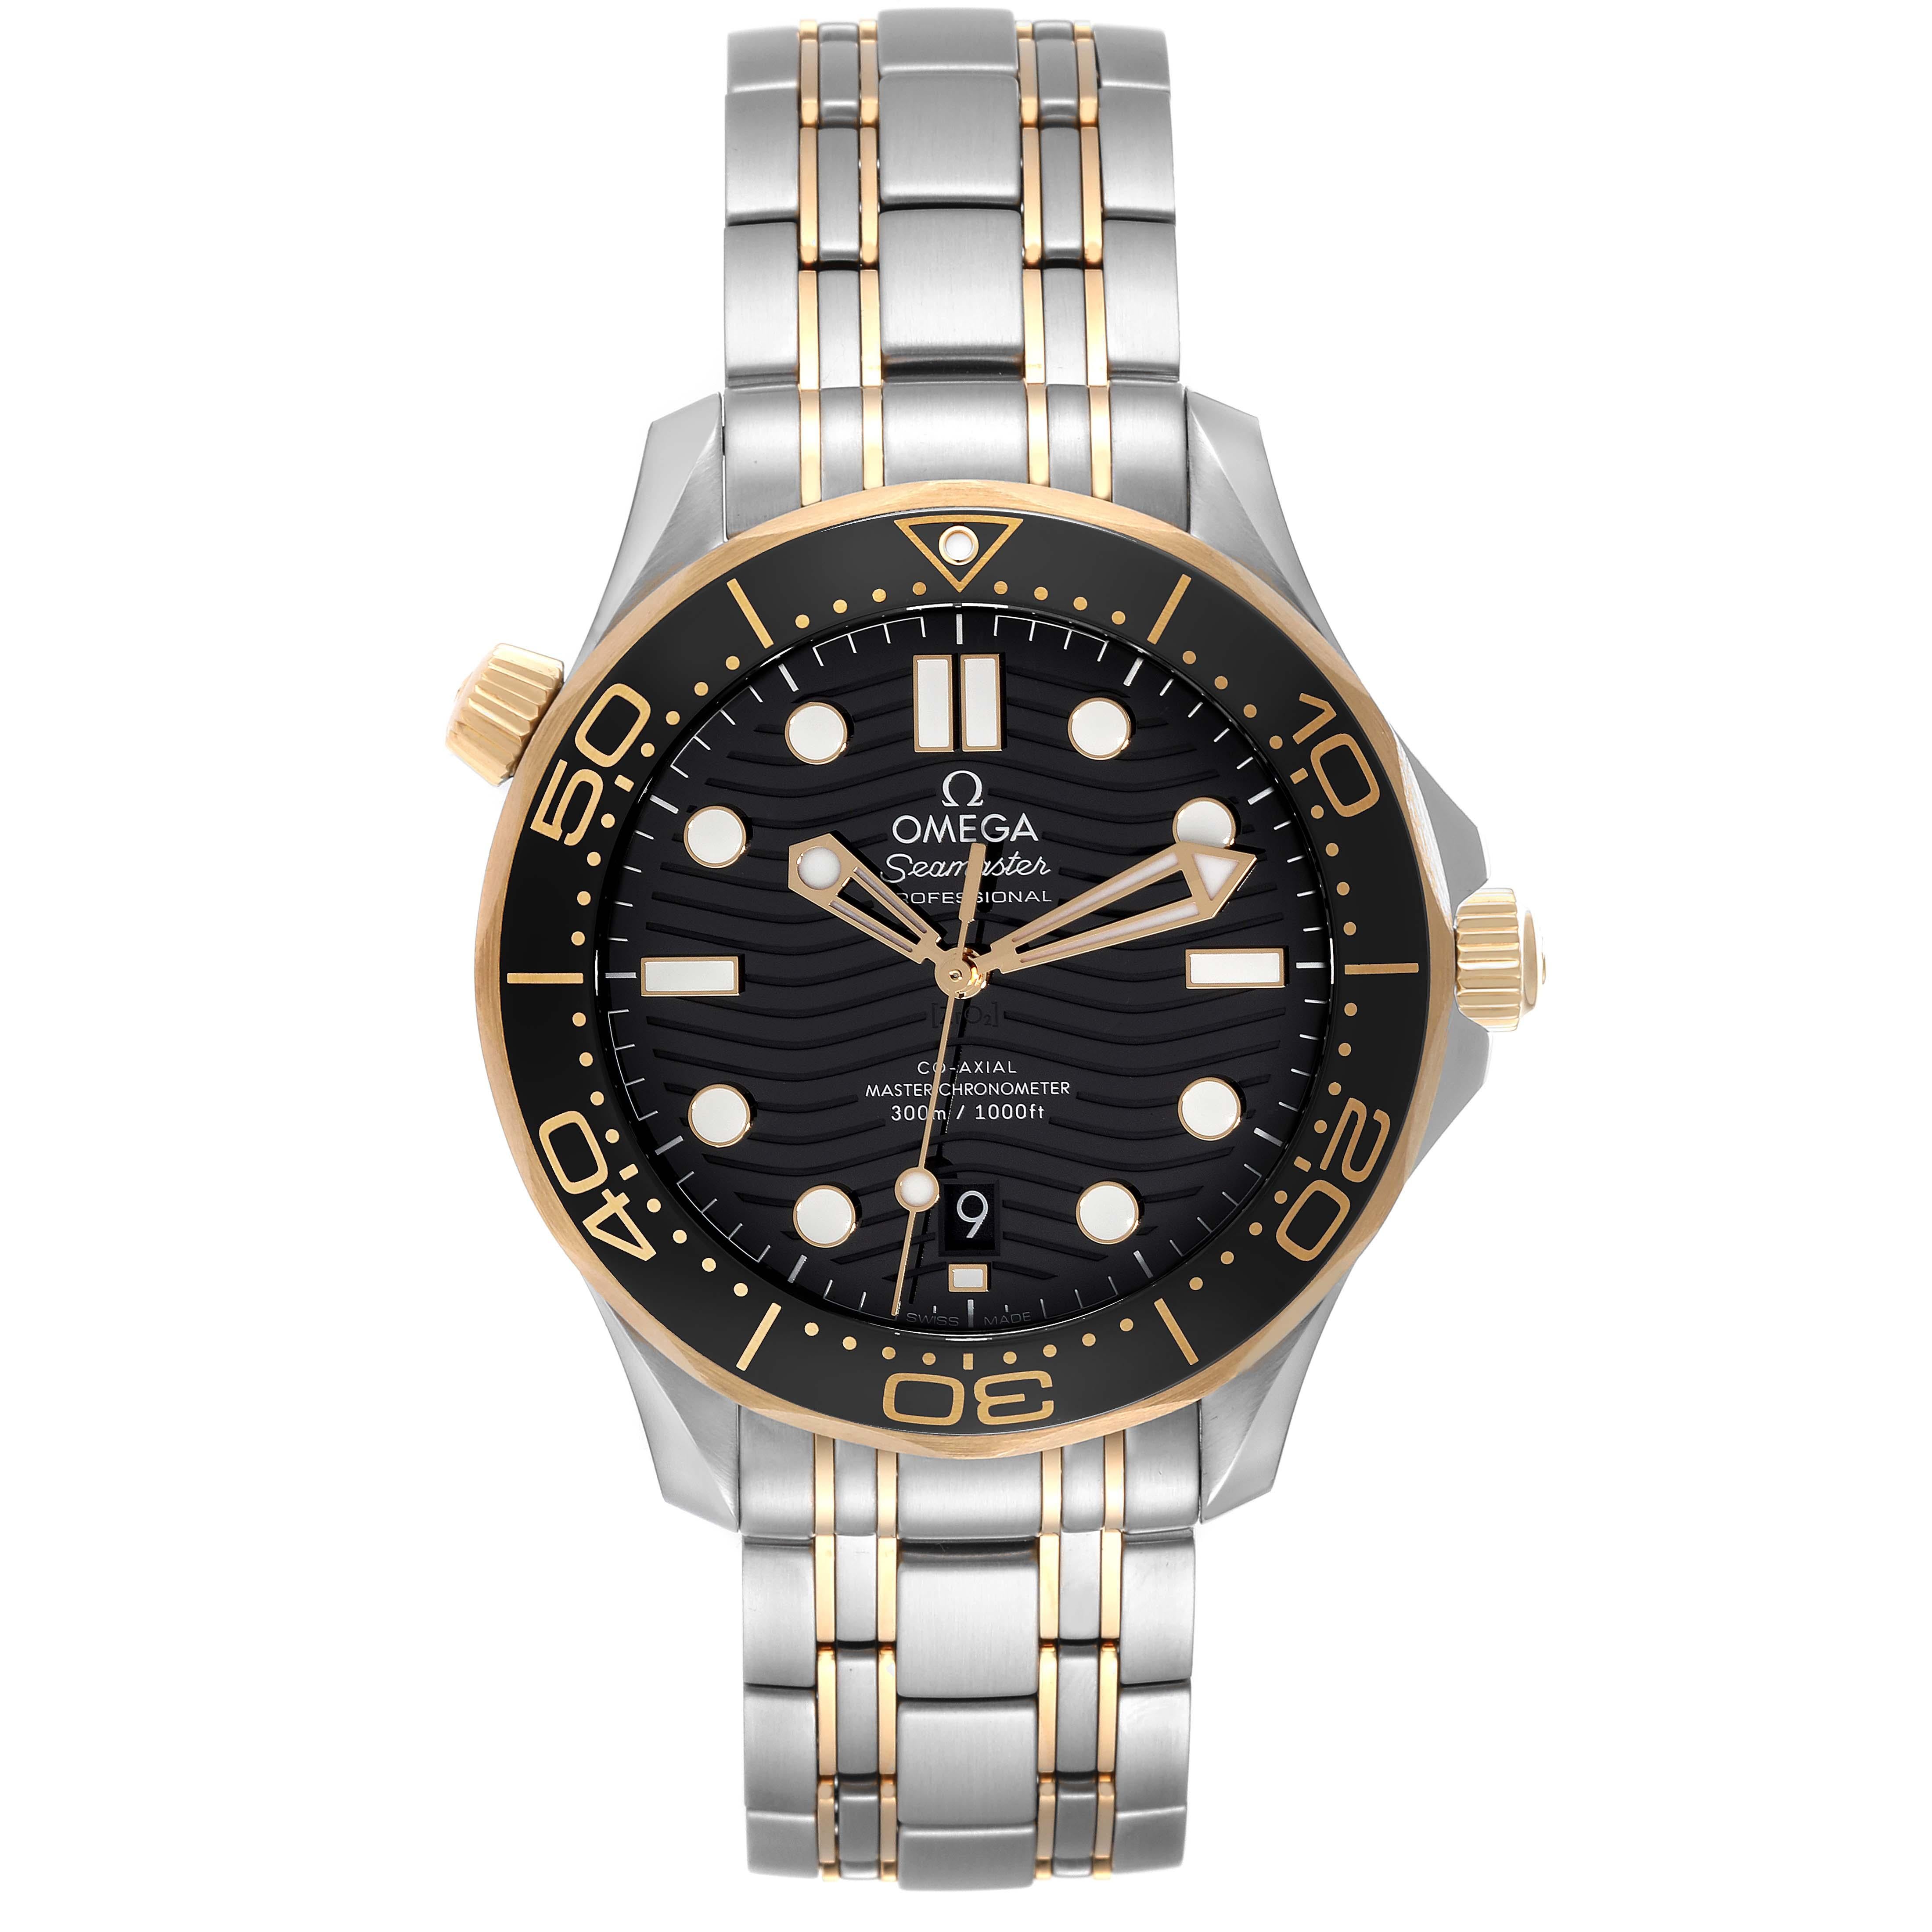 Omega Seamaster Steel Yellow Gold Mens Watch 210.20.42.20.01.002 Box Card. Automatic self-winding chronometer, Co-Axial Escapement movement. Certified Master Chronometer, approved by METAS, resistant to magnetic fields reaching 15,000 gauss. Free